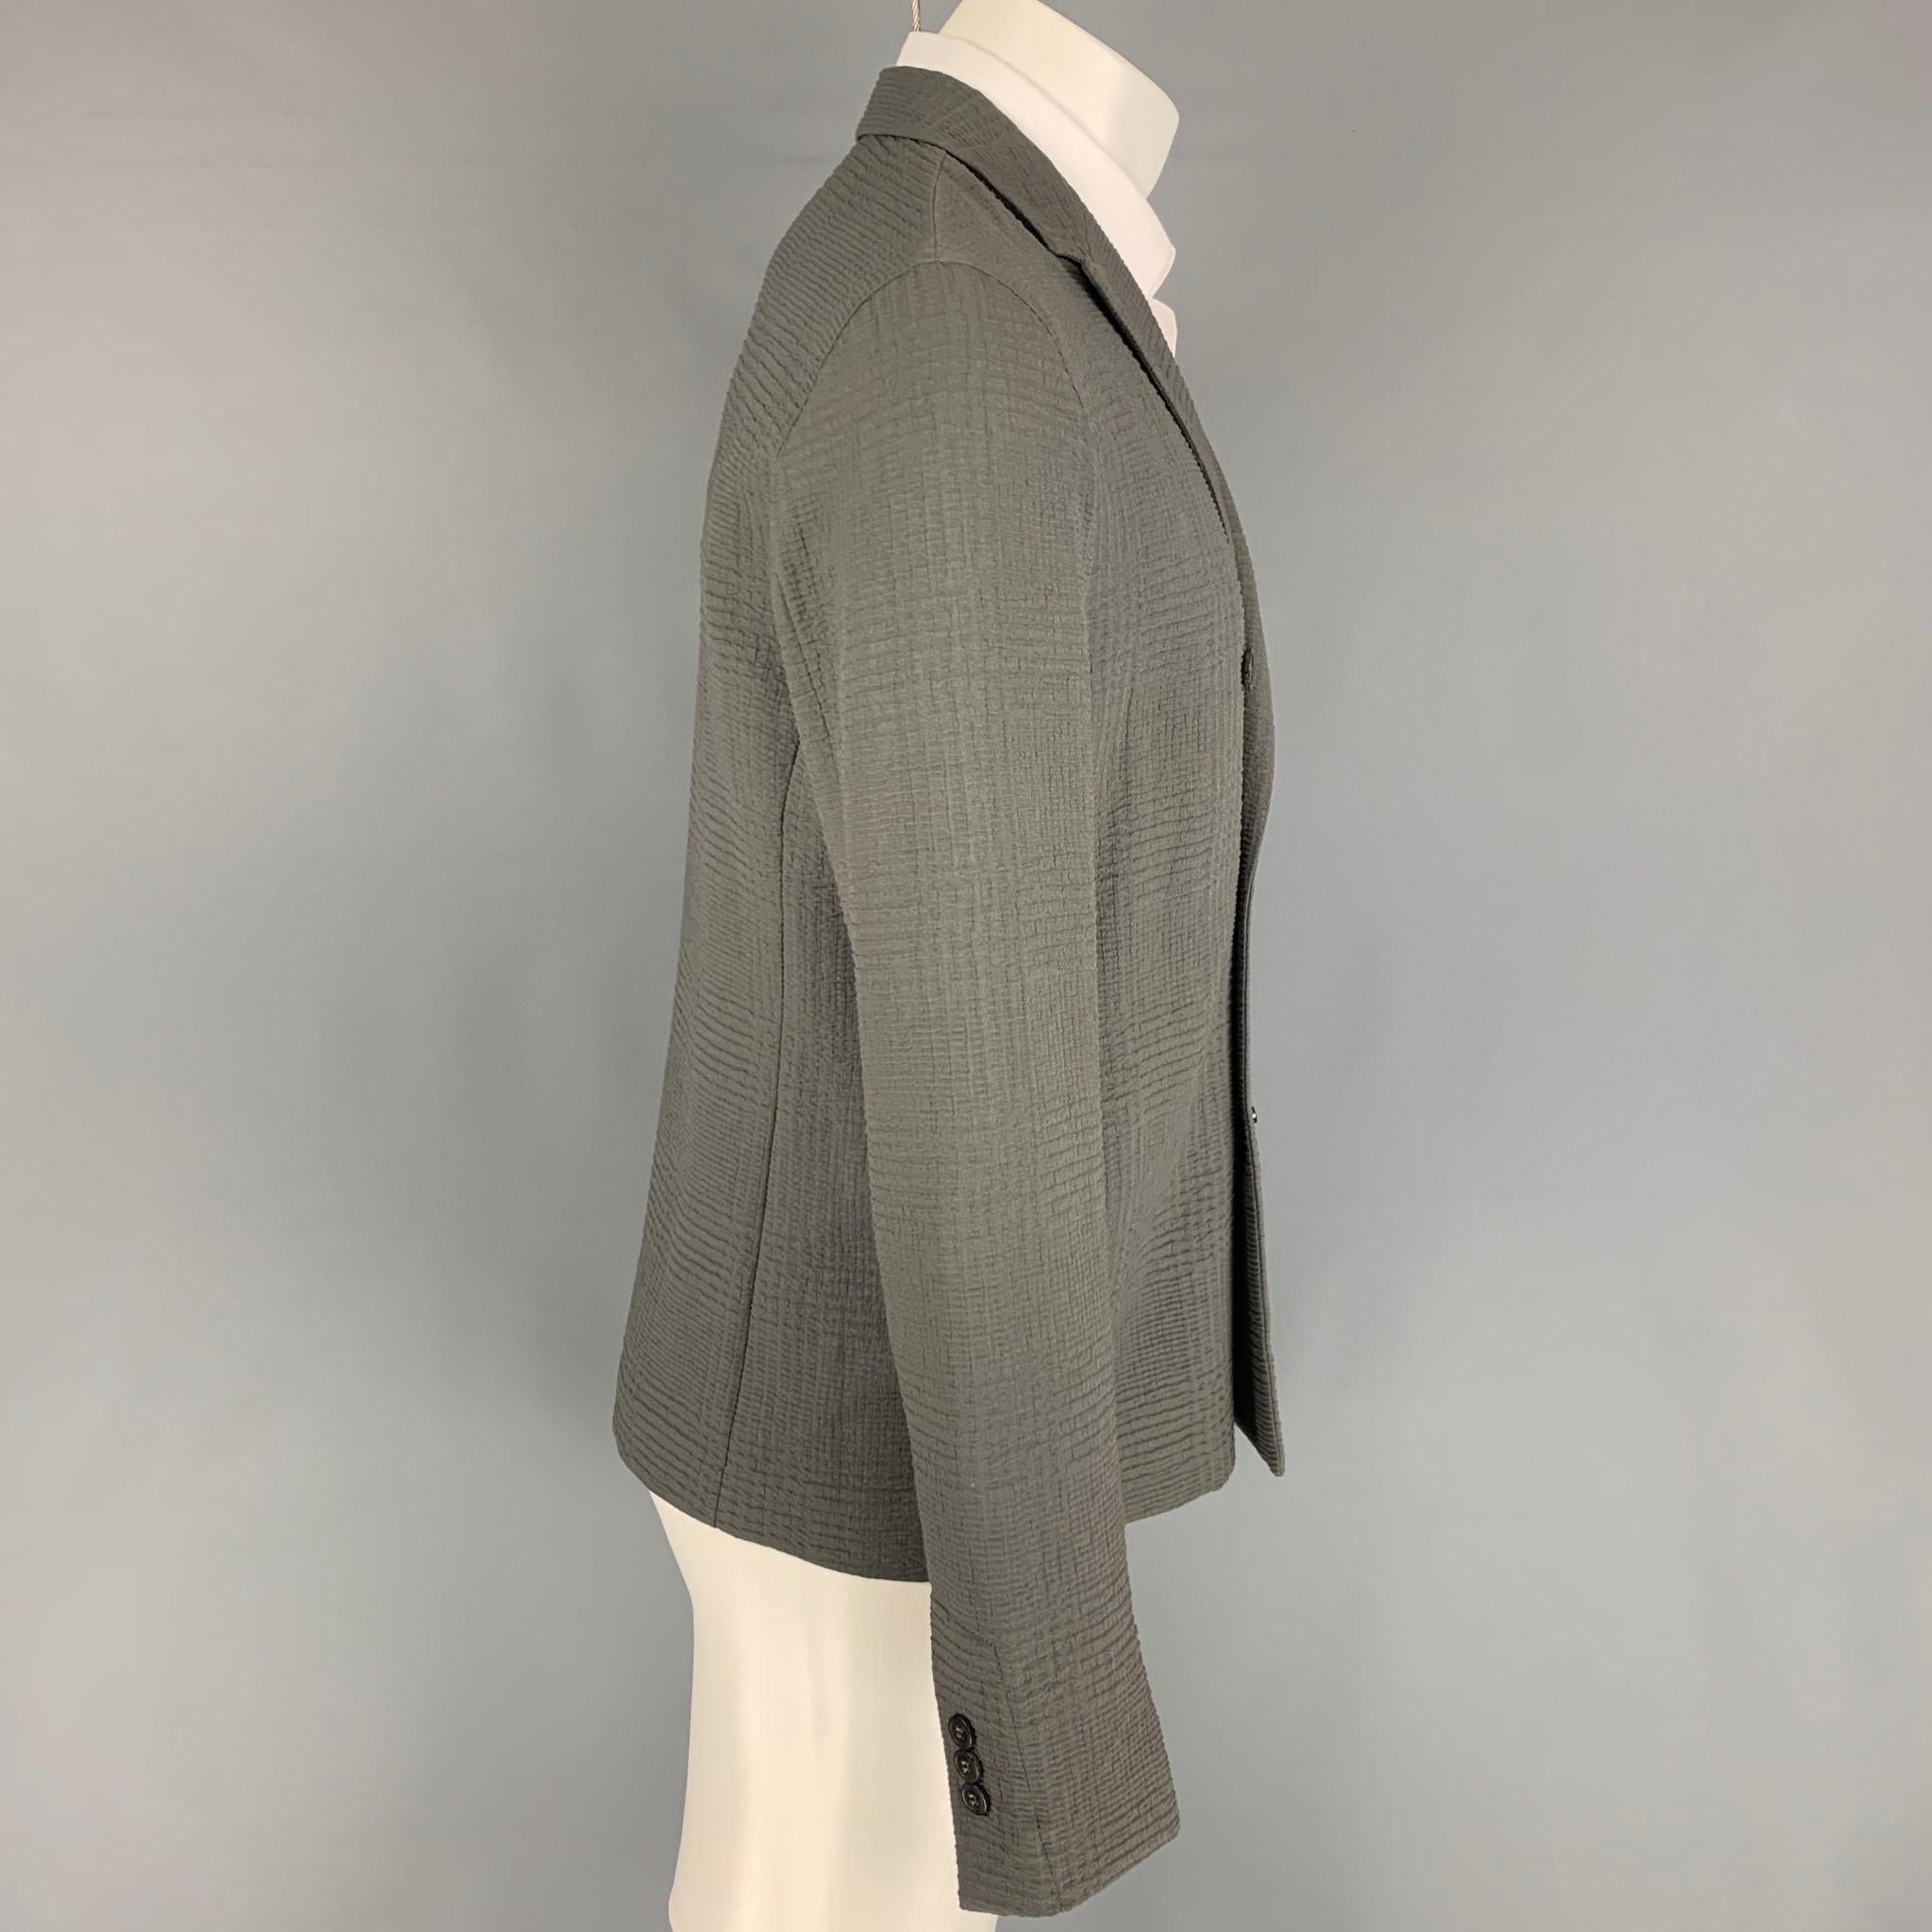 EMPORIO ARMANI sport coat comes in a slate textured material featuring a peak lapel, slit pockets, and a double breasted closure. Made in Italy. 

Very Good Pre-Owned Condition. Fabric tag removed.
Marked: Size tag removed.

Measurements:

Shoulder: